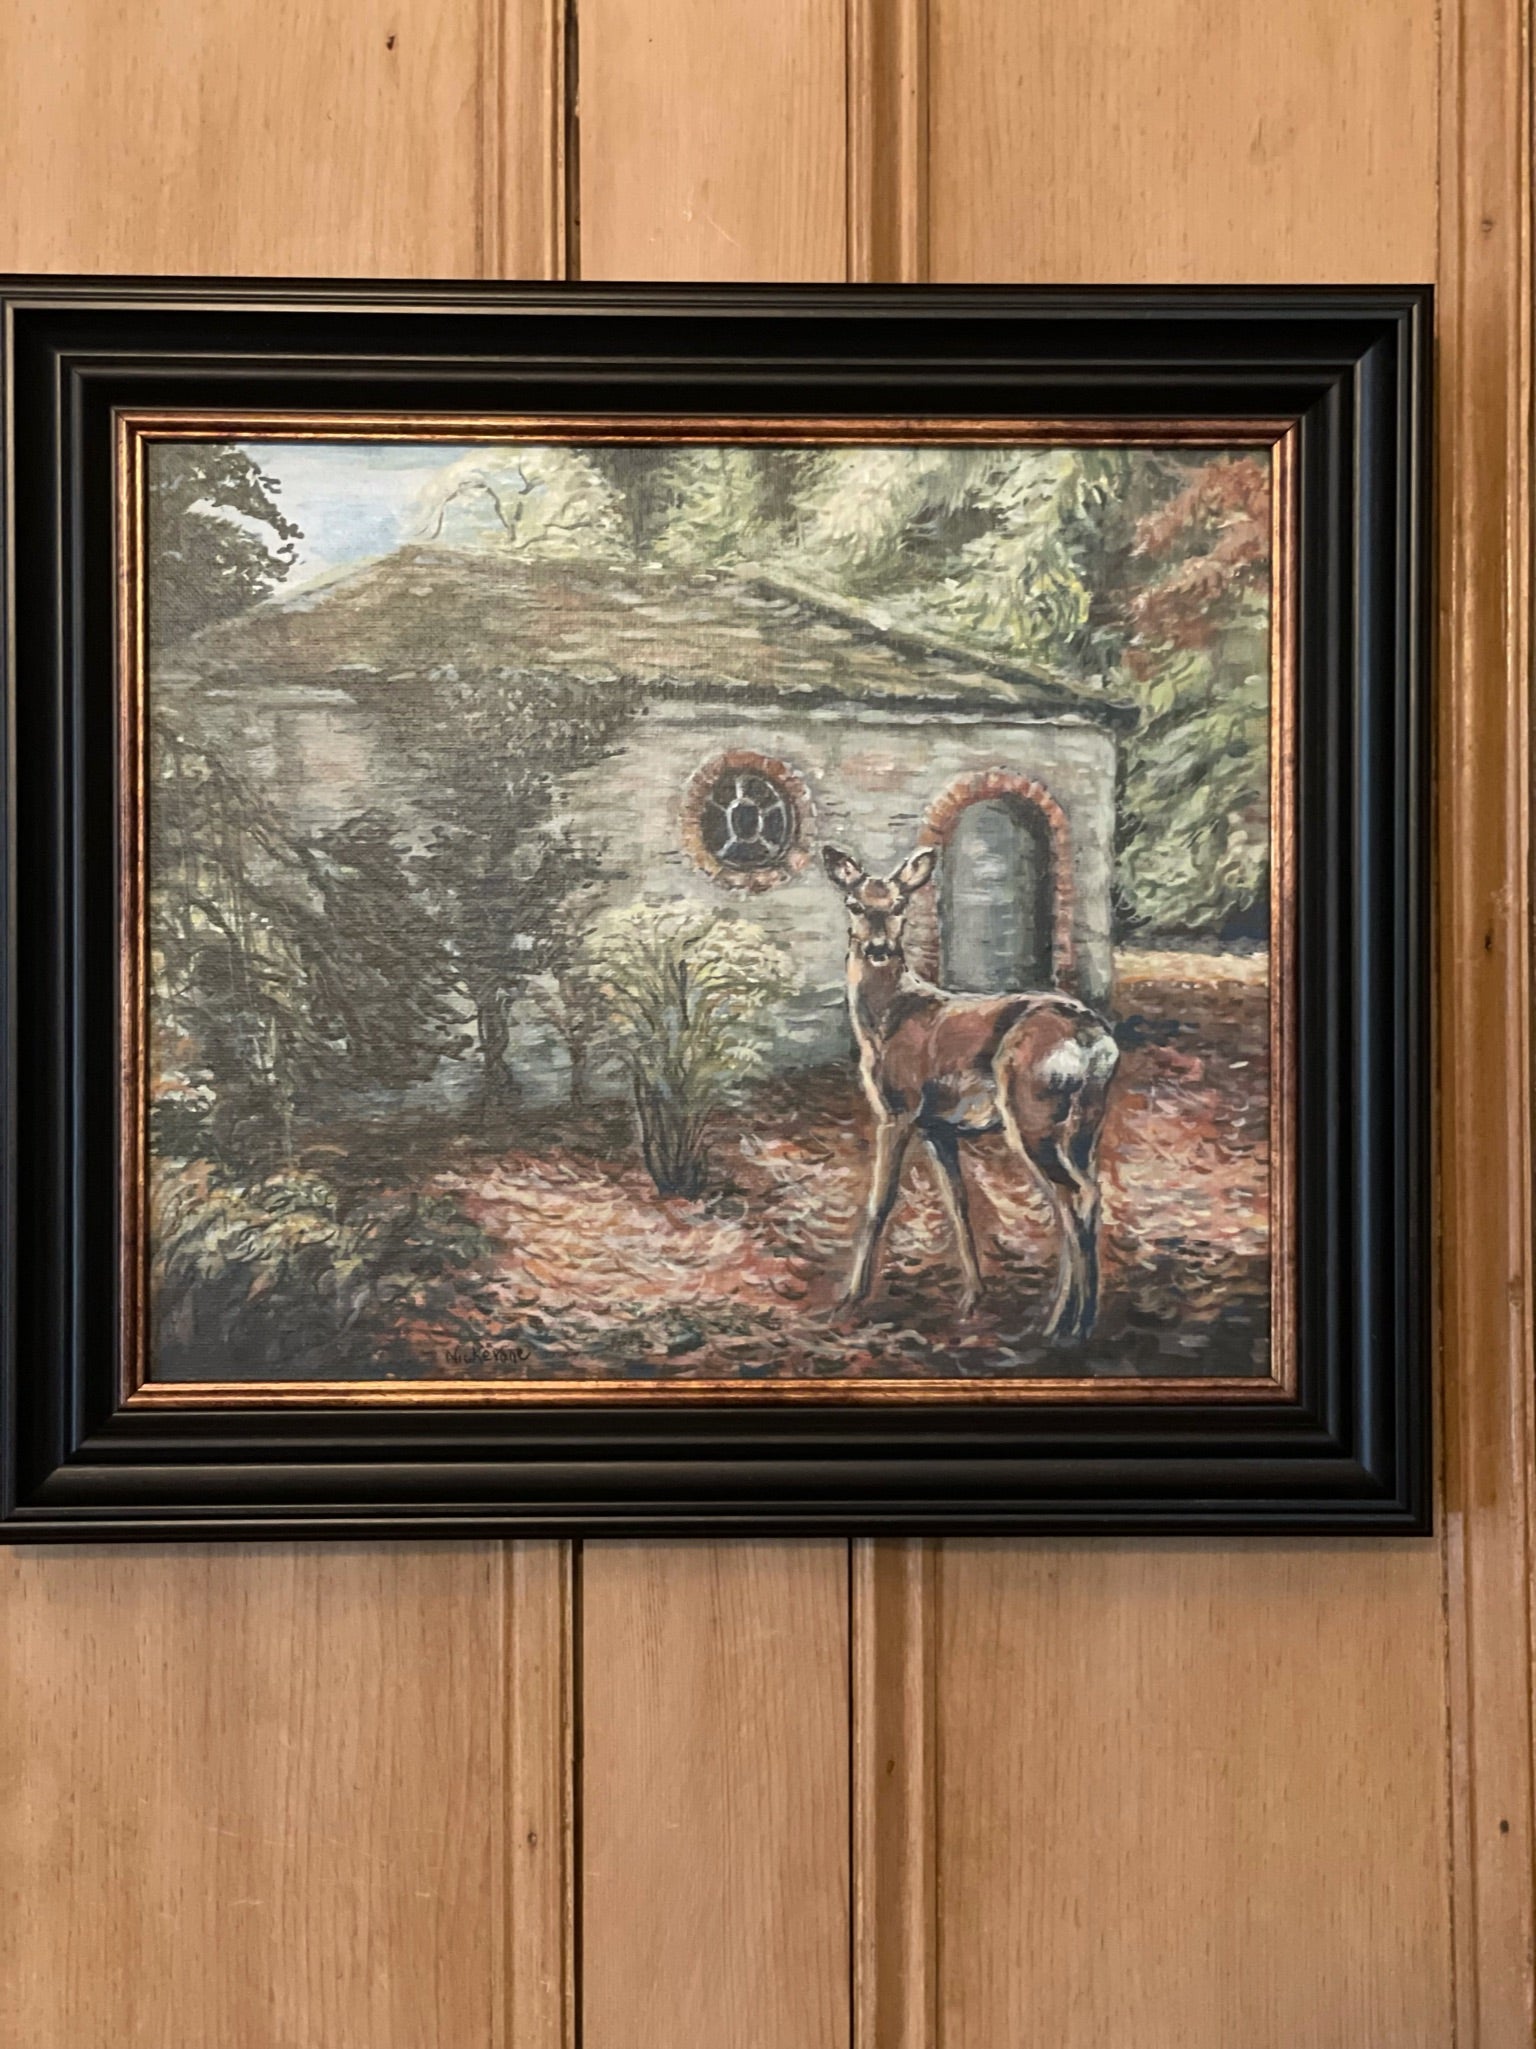 A painting of a roe deer in a woodland landscape. The surprised deer is glimpsed by the viewer near an old picturesque shelter in the woods.